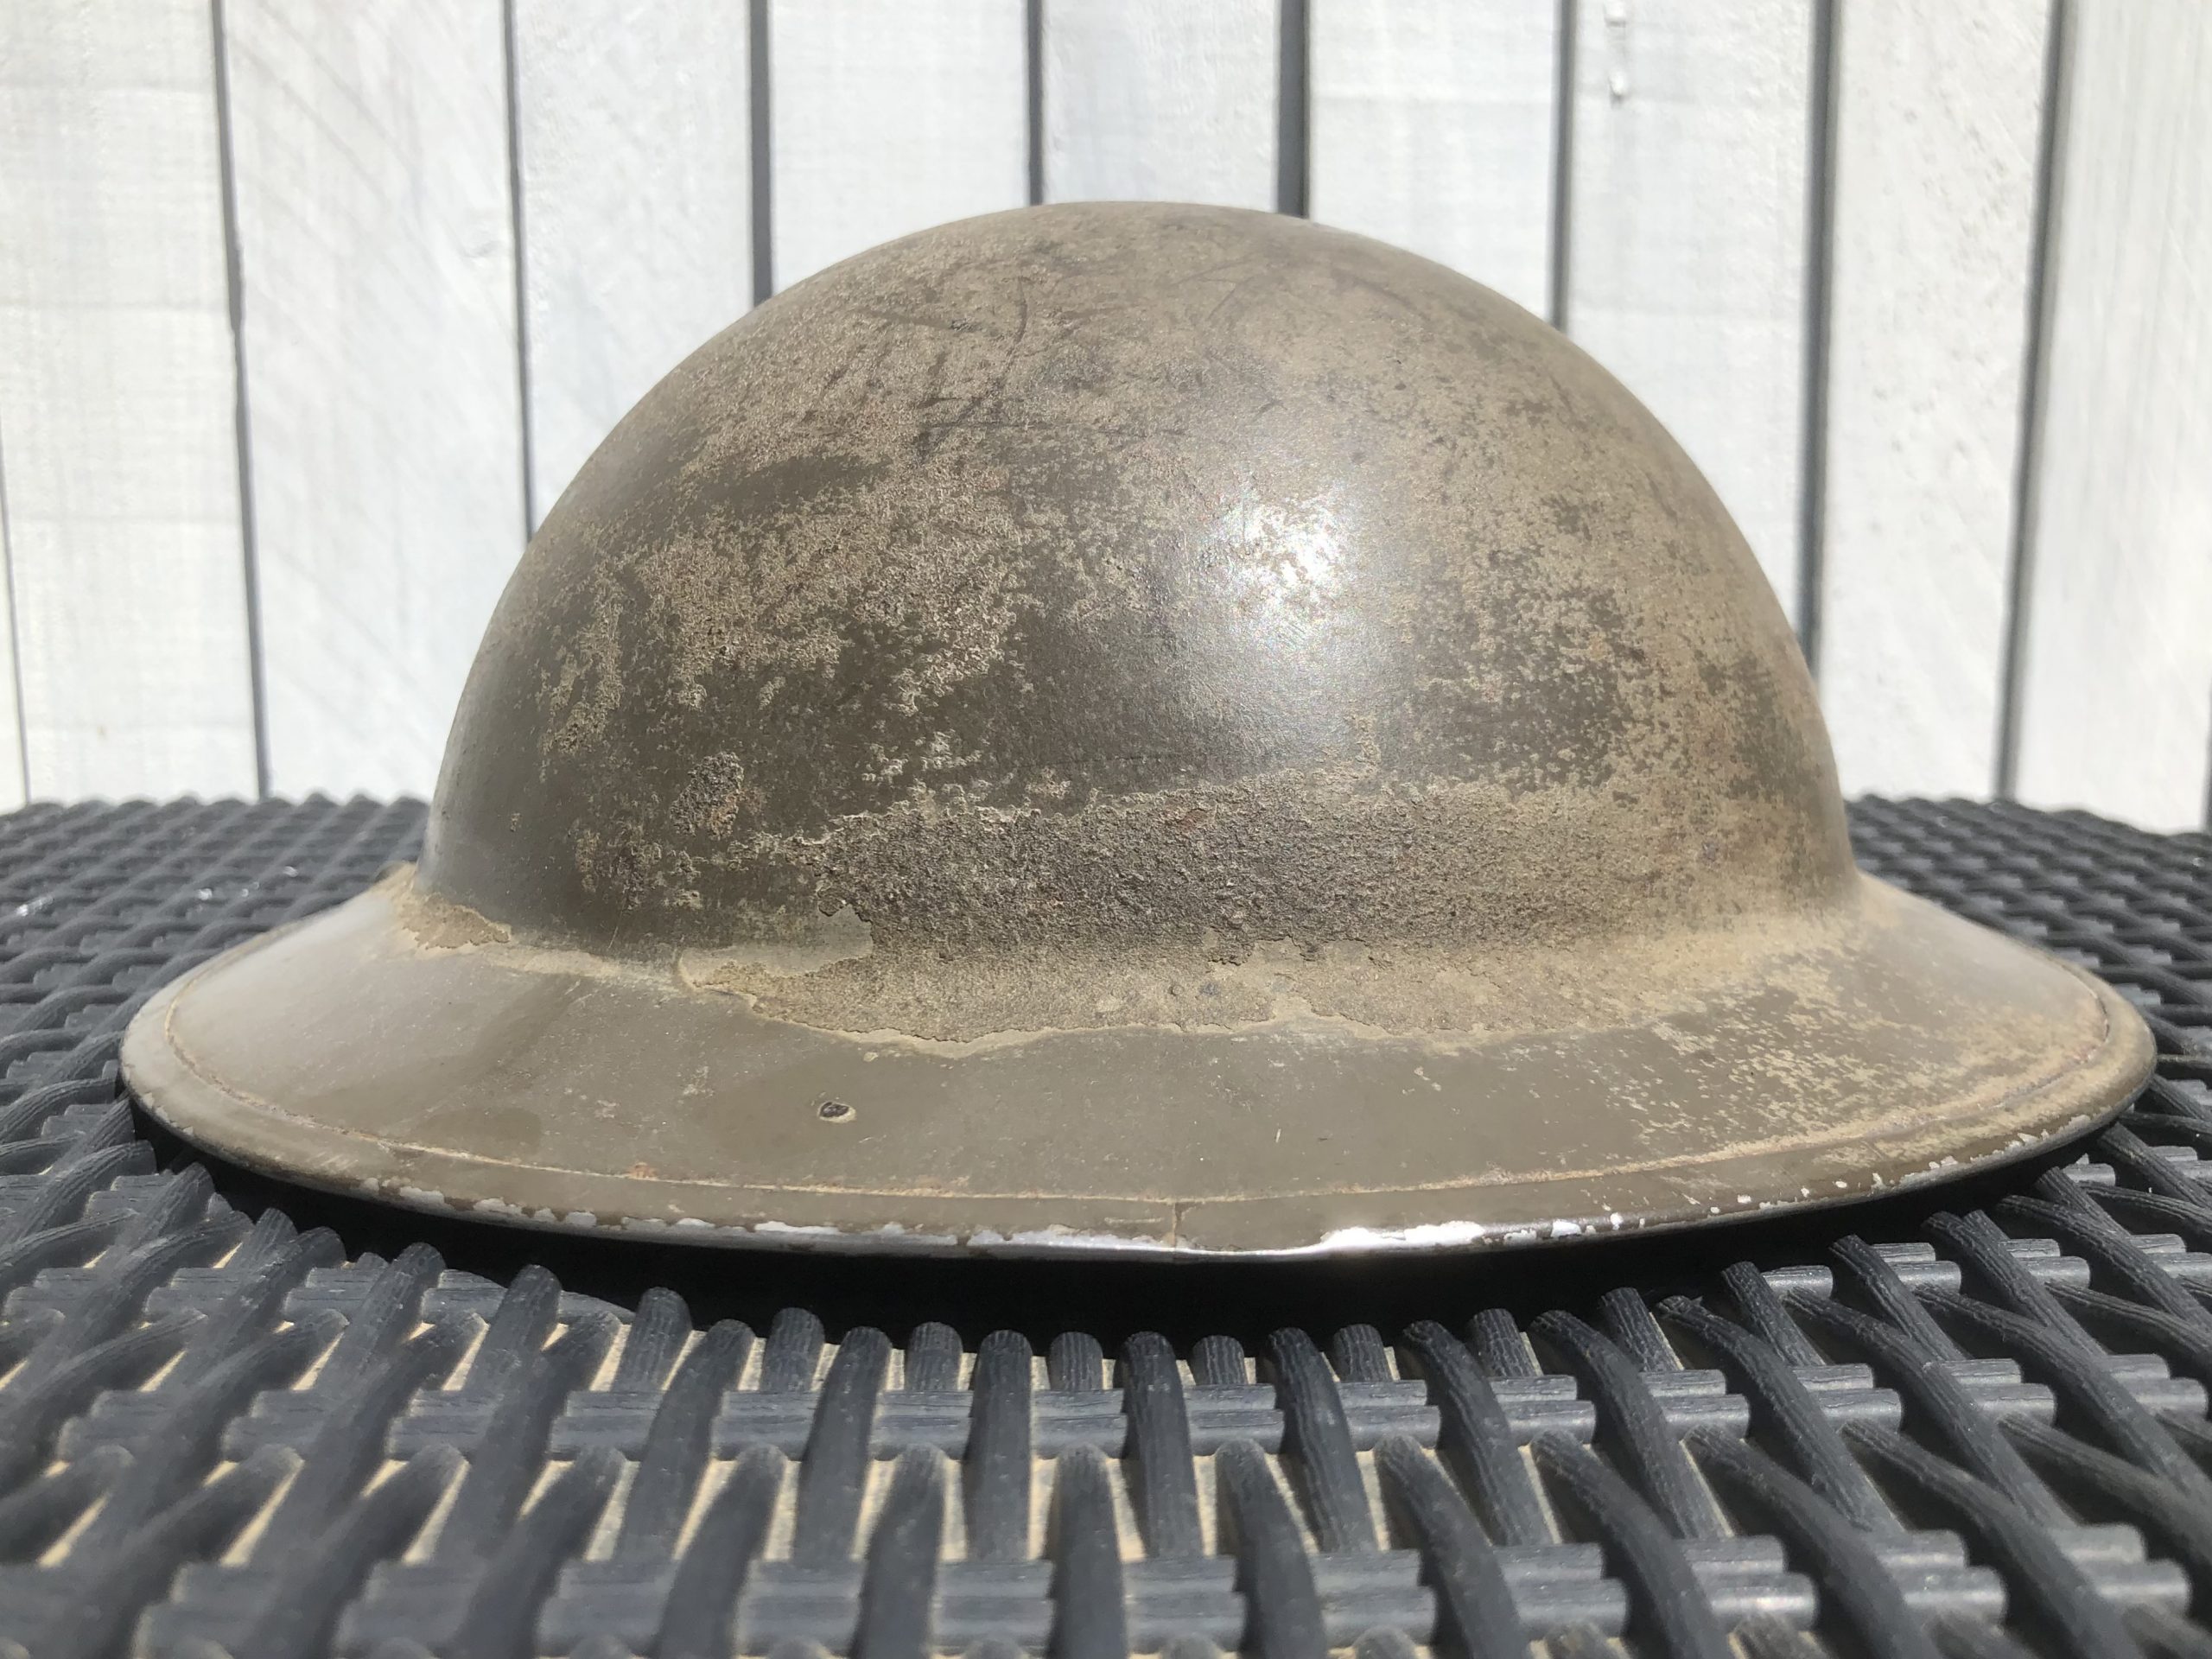 What you will you do with an old German Helmet?